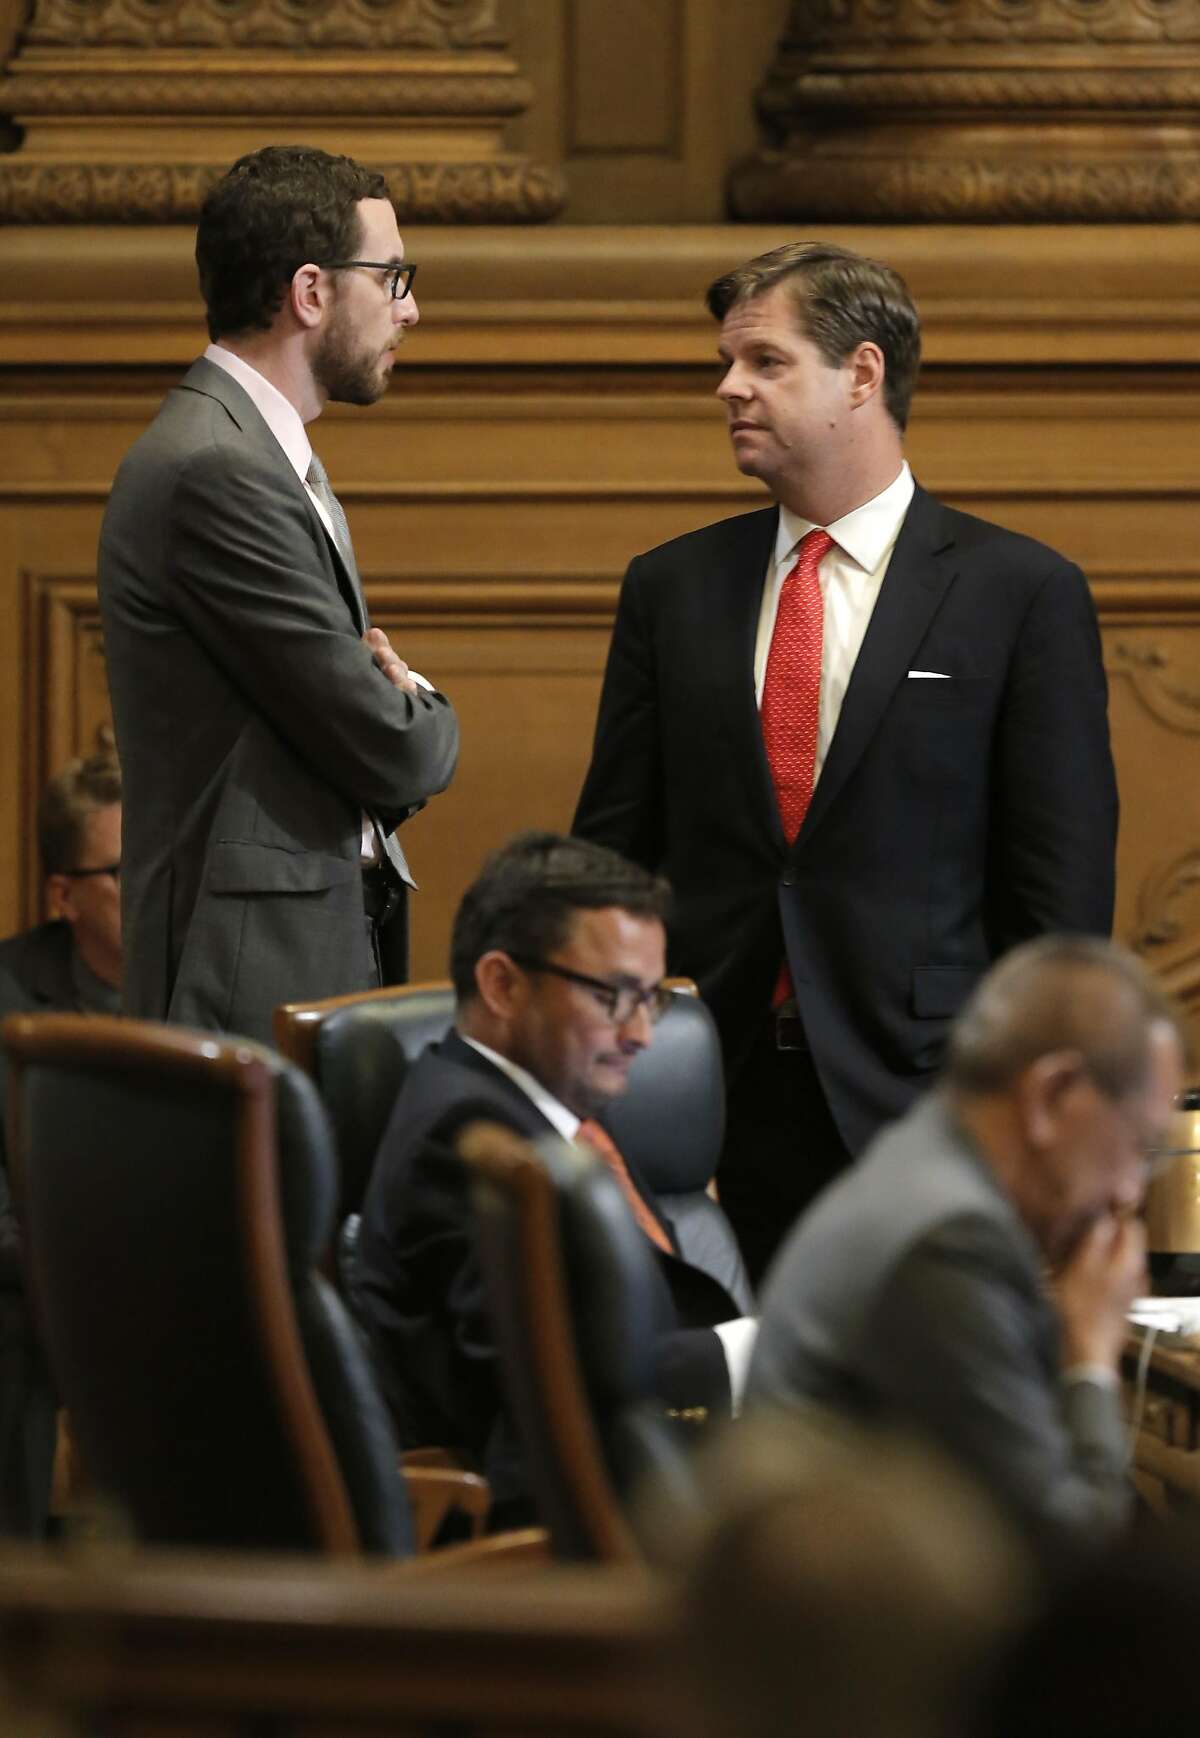 Supervisor's Scott Wiener, (left) and Mark Farrell discuss the proposals as the San Francisco Board of Supervisor prepared to vote on competing measures to regulate Airbnb and other short-term rental services in San Francisco, Calif., on Tues. July 14, 2015.